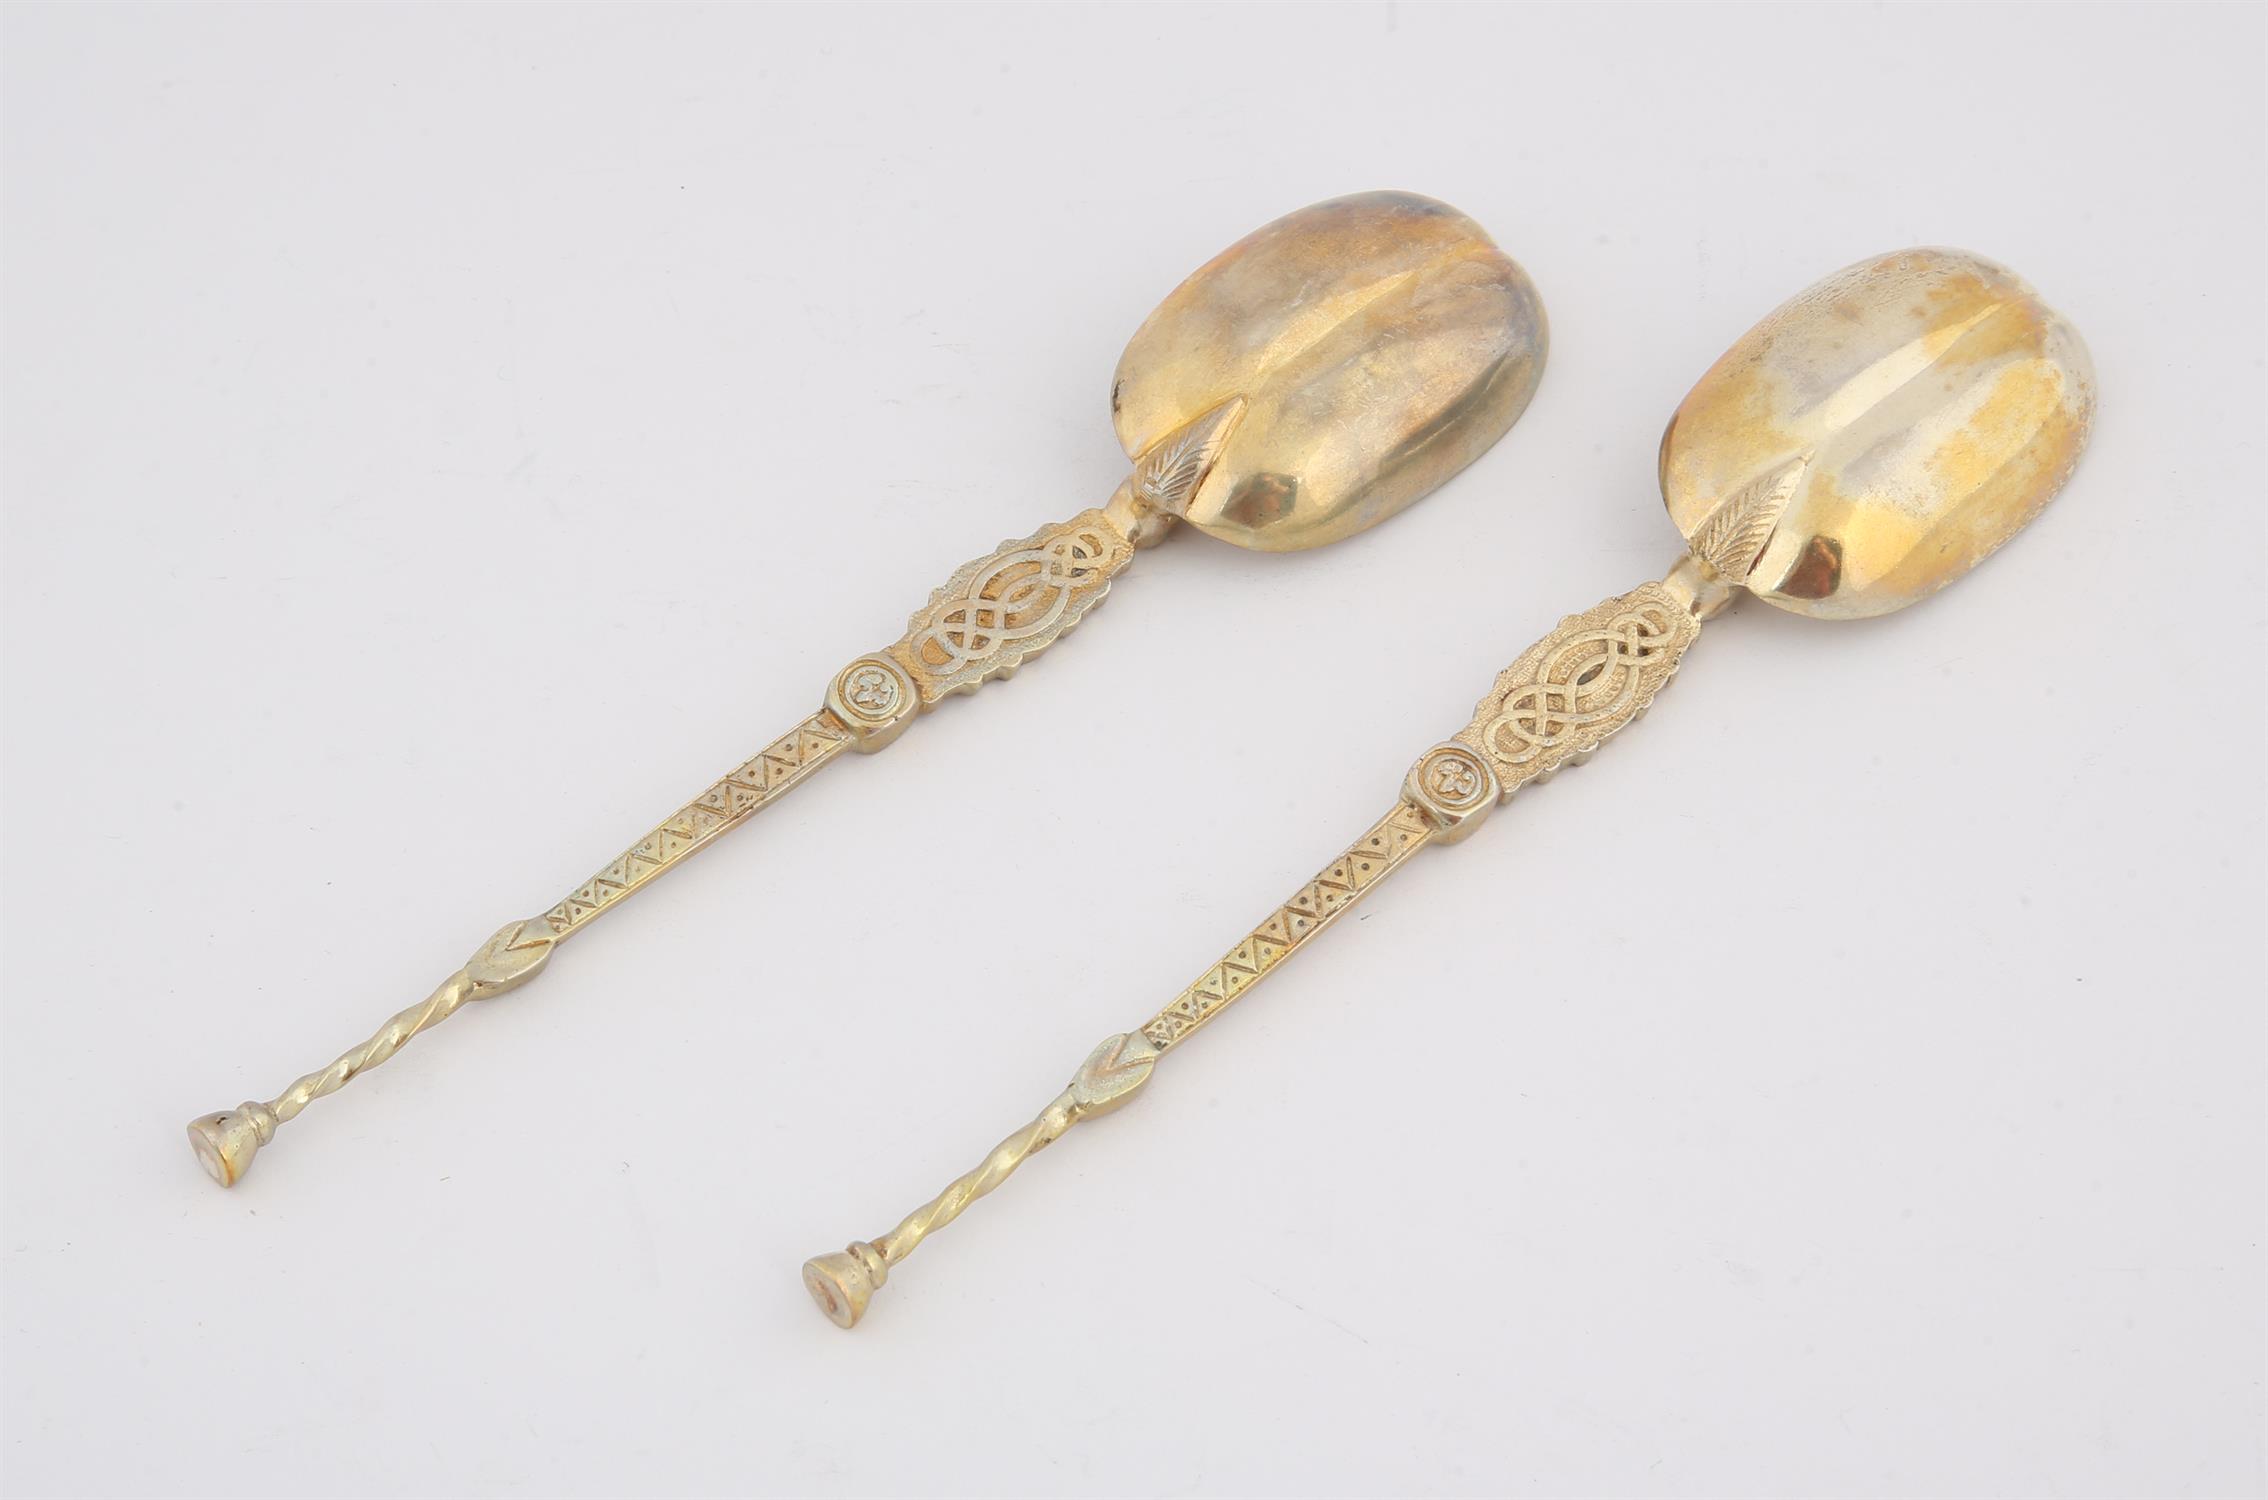 Pair of cast and engraved silver copies of The Royal Annointing or Coronation spoon (London, 1910, - Image 2 of 2